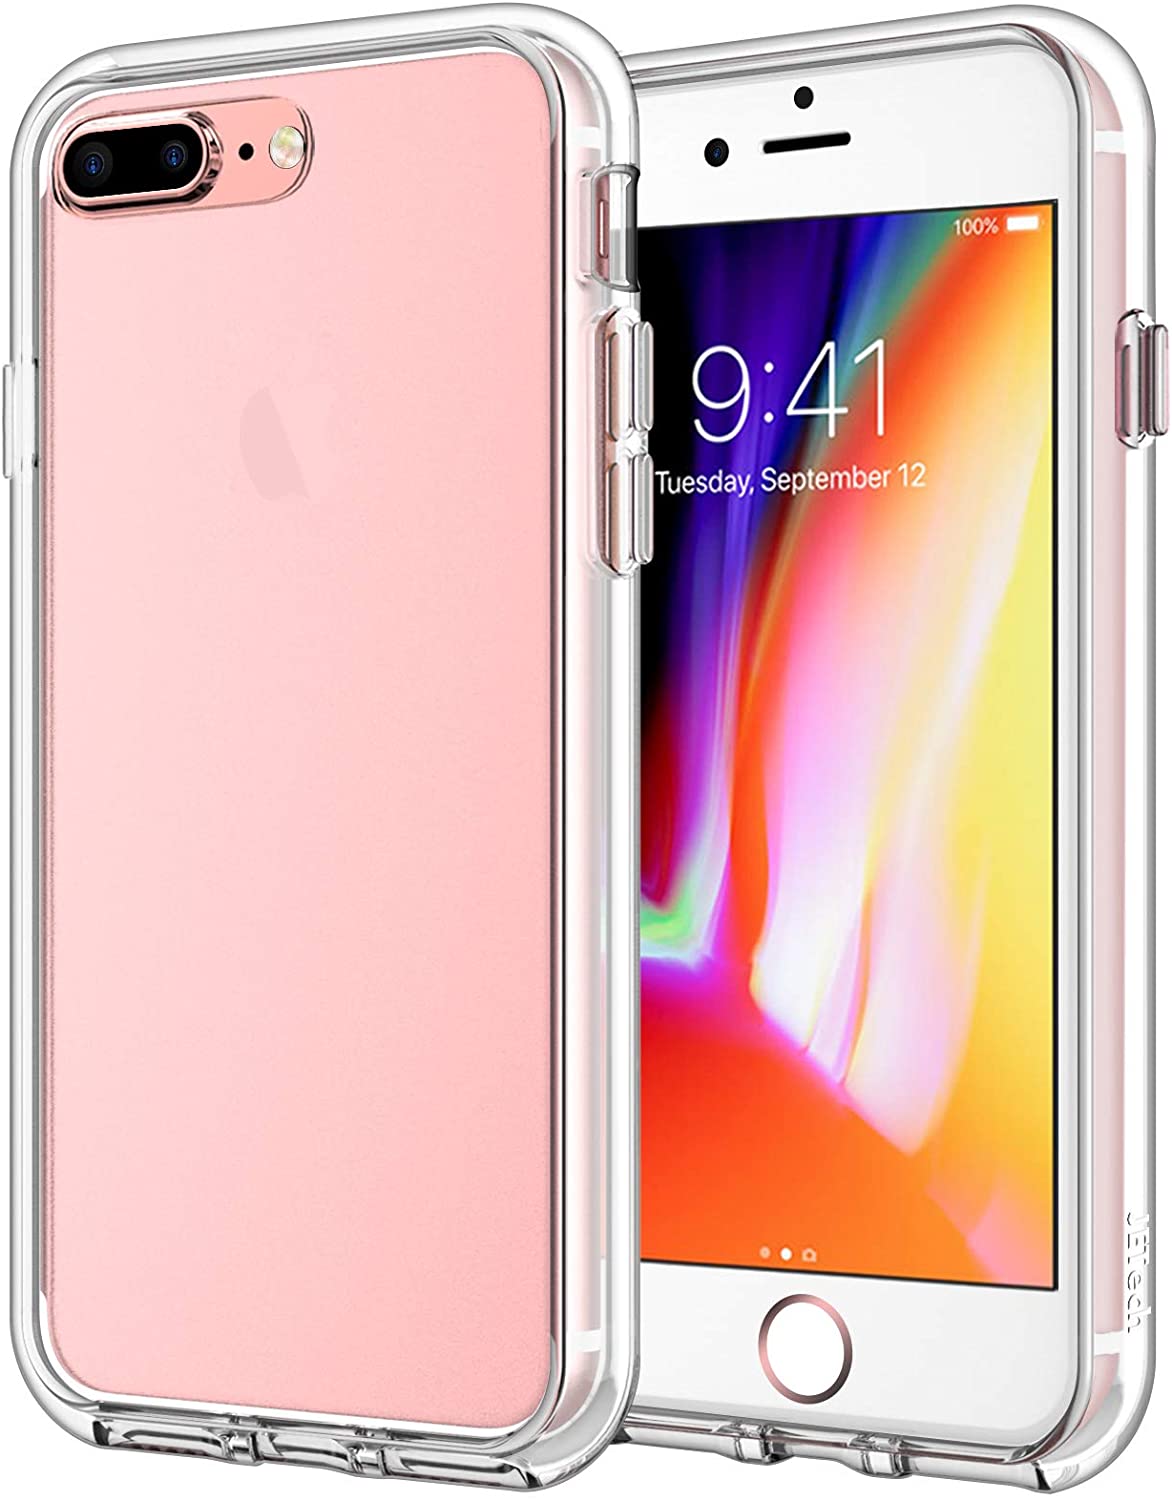 JETech Case Compatible with iPhone 8 Plus, Compatible with iPhone 7 Plus, 5.5-Inch, Shockproof Bumper Cover, Anti-Scratch Clear Back, Clear - e4cents